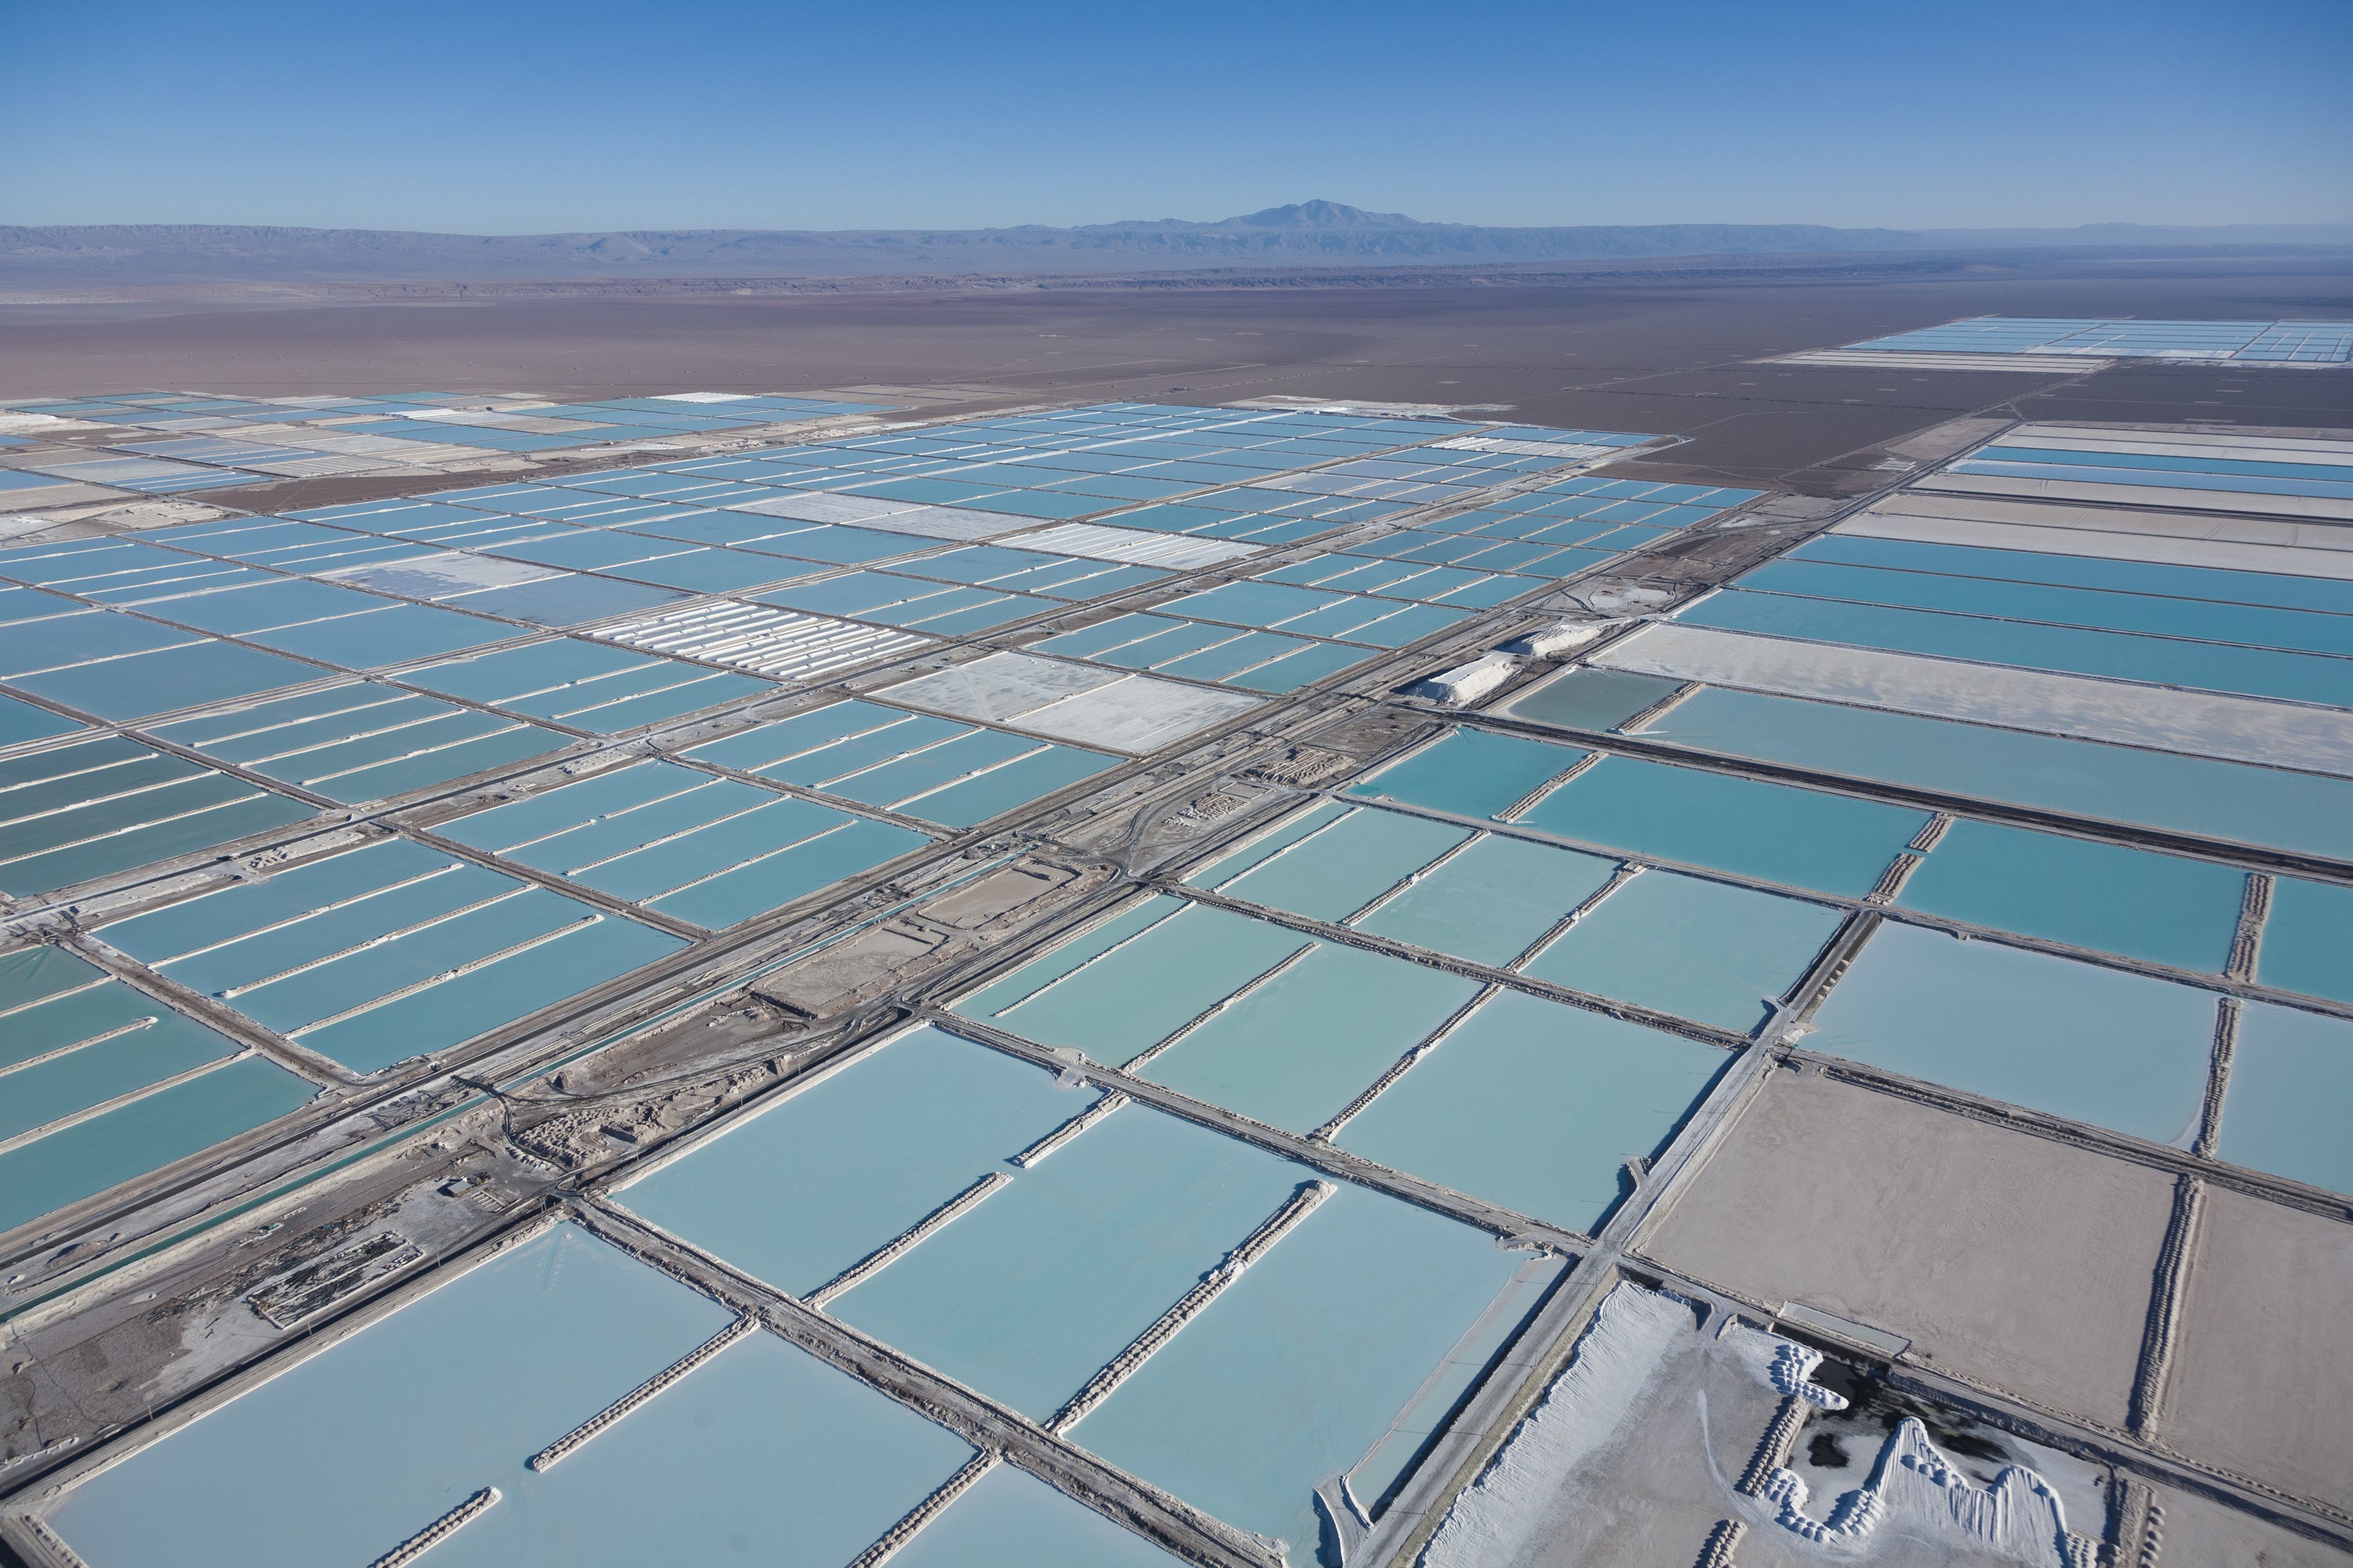 For sale: world’s largest lithium mine